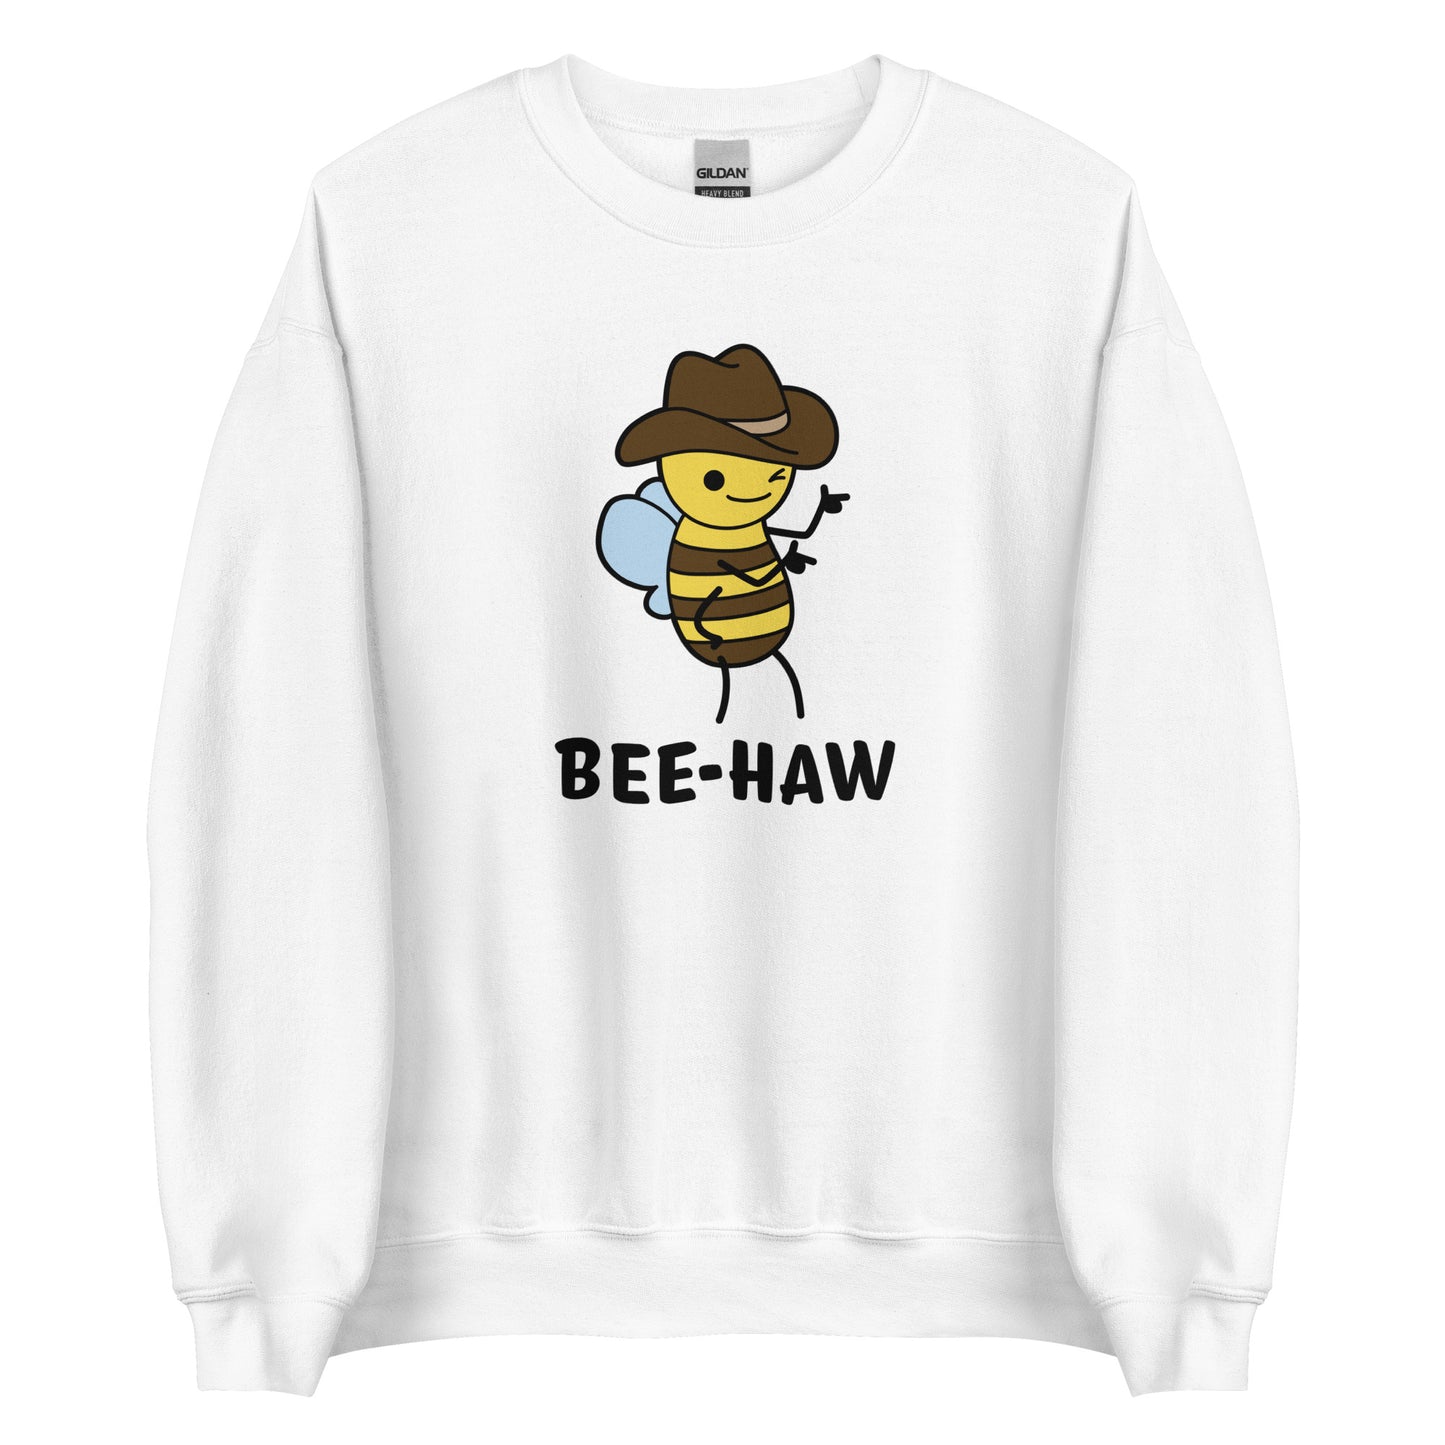 A white crewneck sweatshirt featuring an image of a bee in a cowboy hat. The bee is winking and holding up "finger guns". Text beneath the bee reads "Bee-Haw"